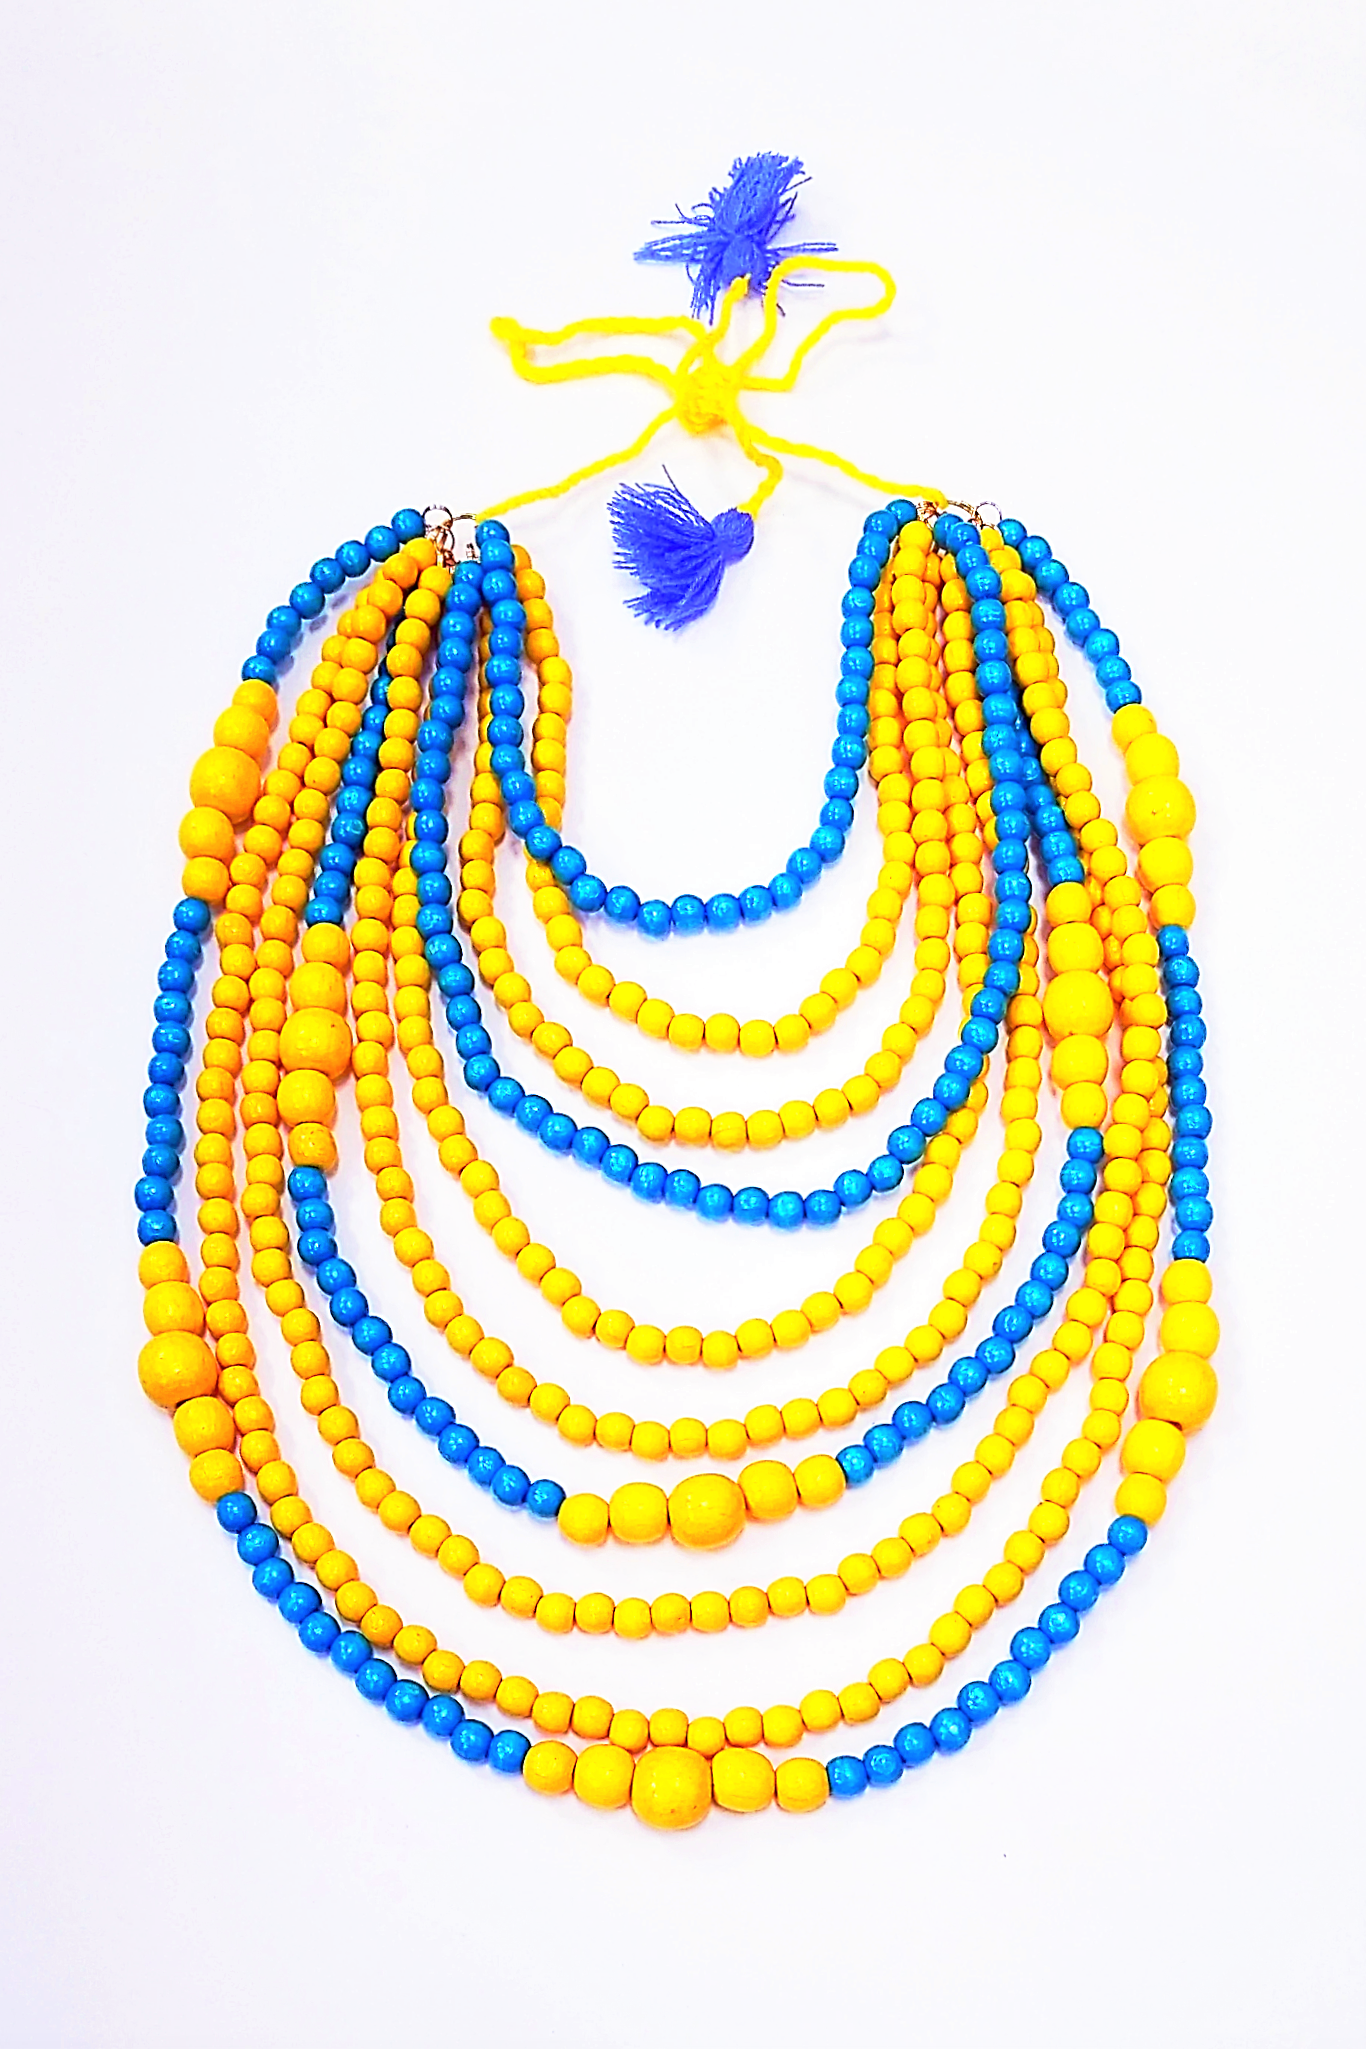 Artisan crafted wooden bead 10-strand necklace. Yellow and blue